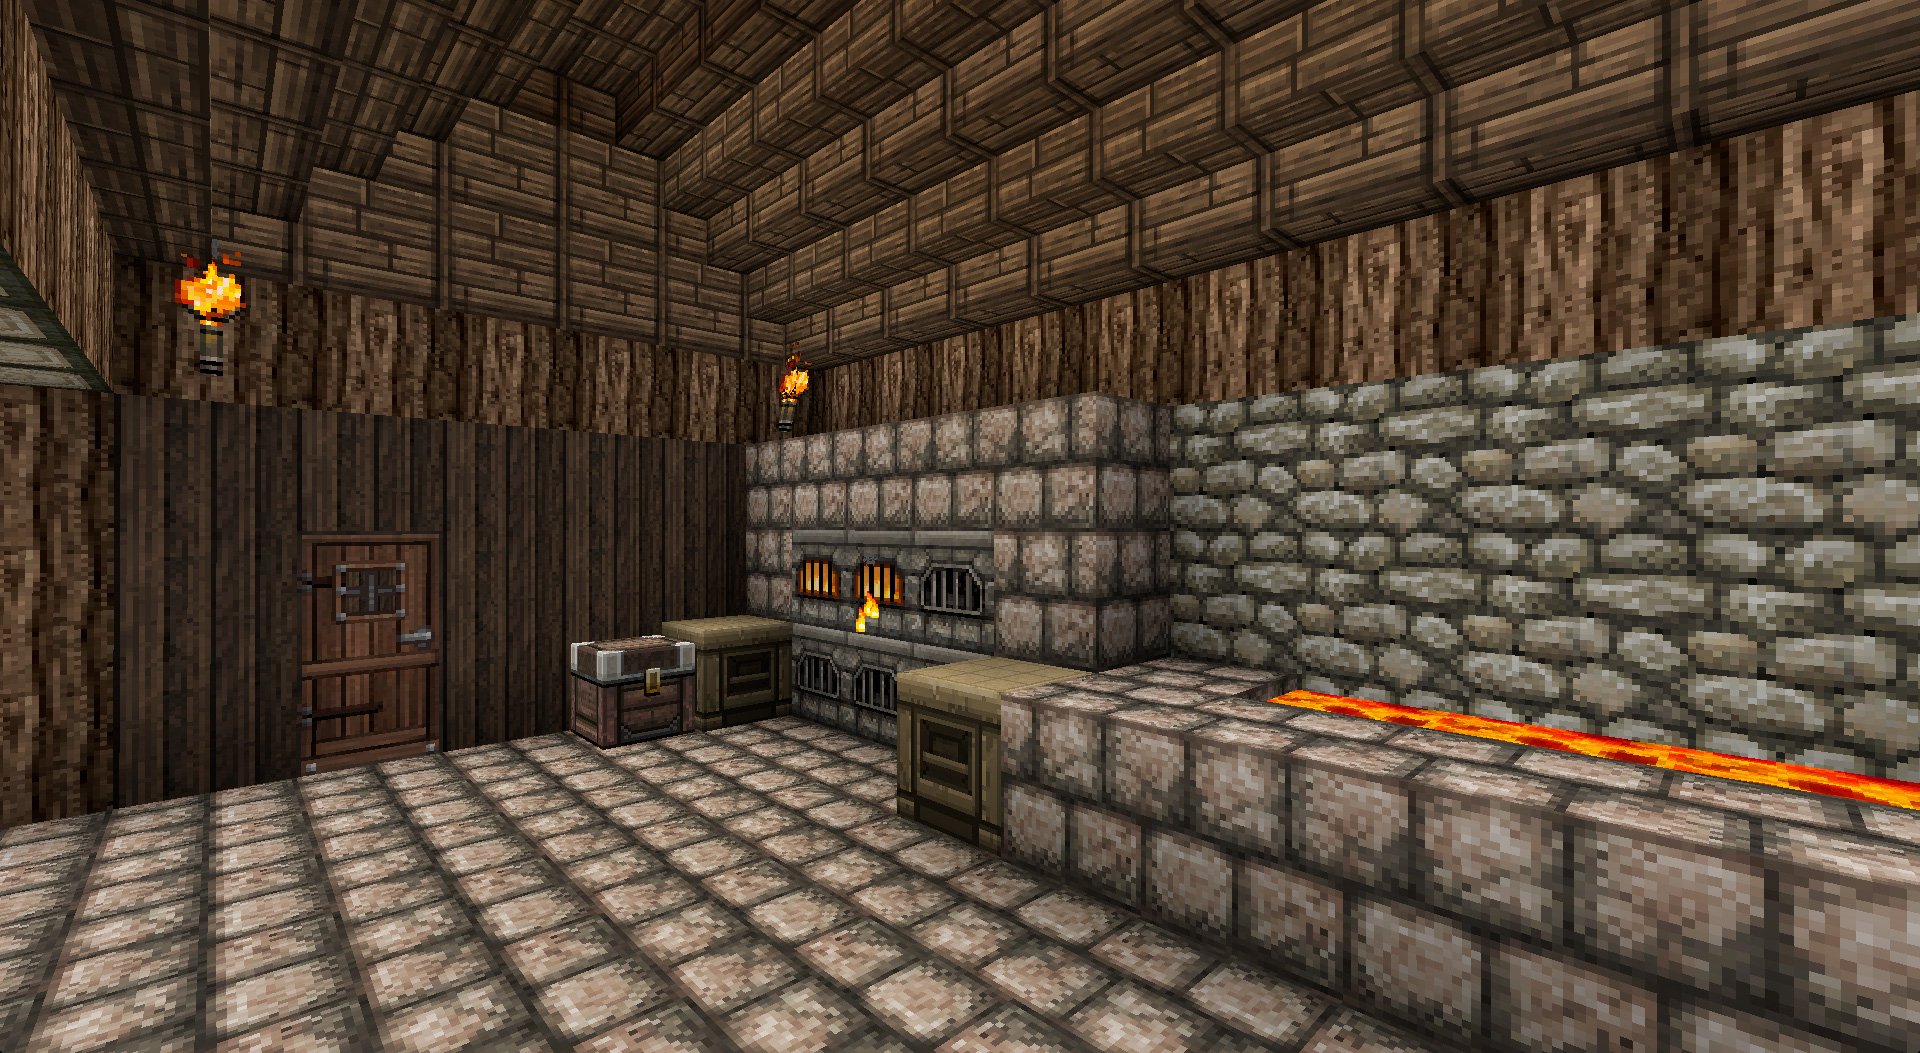 TPT_LEGACY_1024x1024 Minecraft Texture Pack